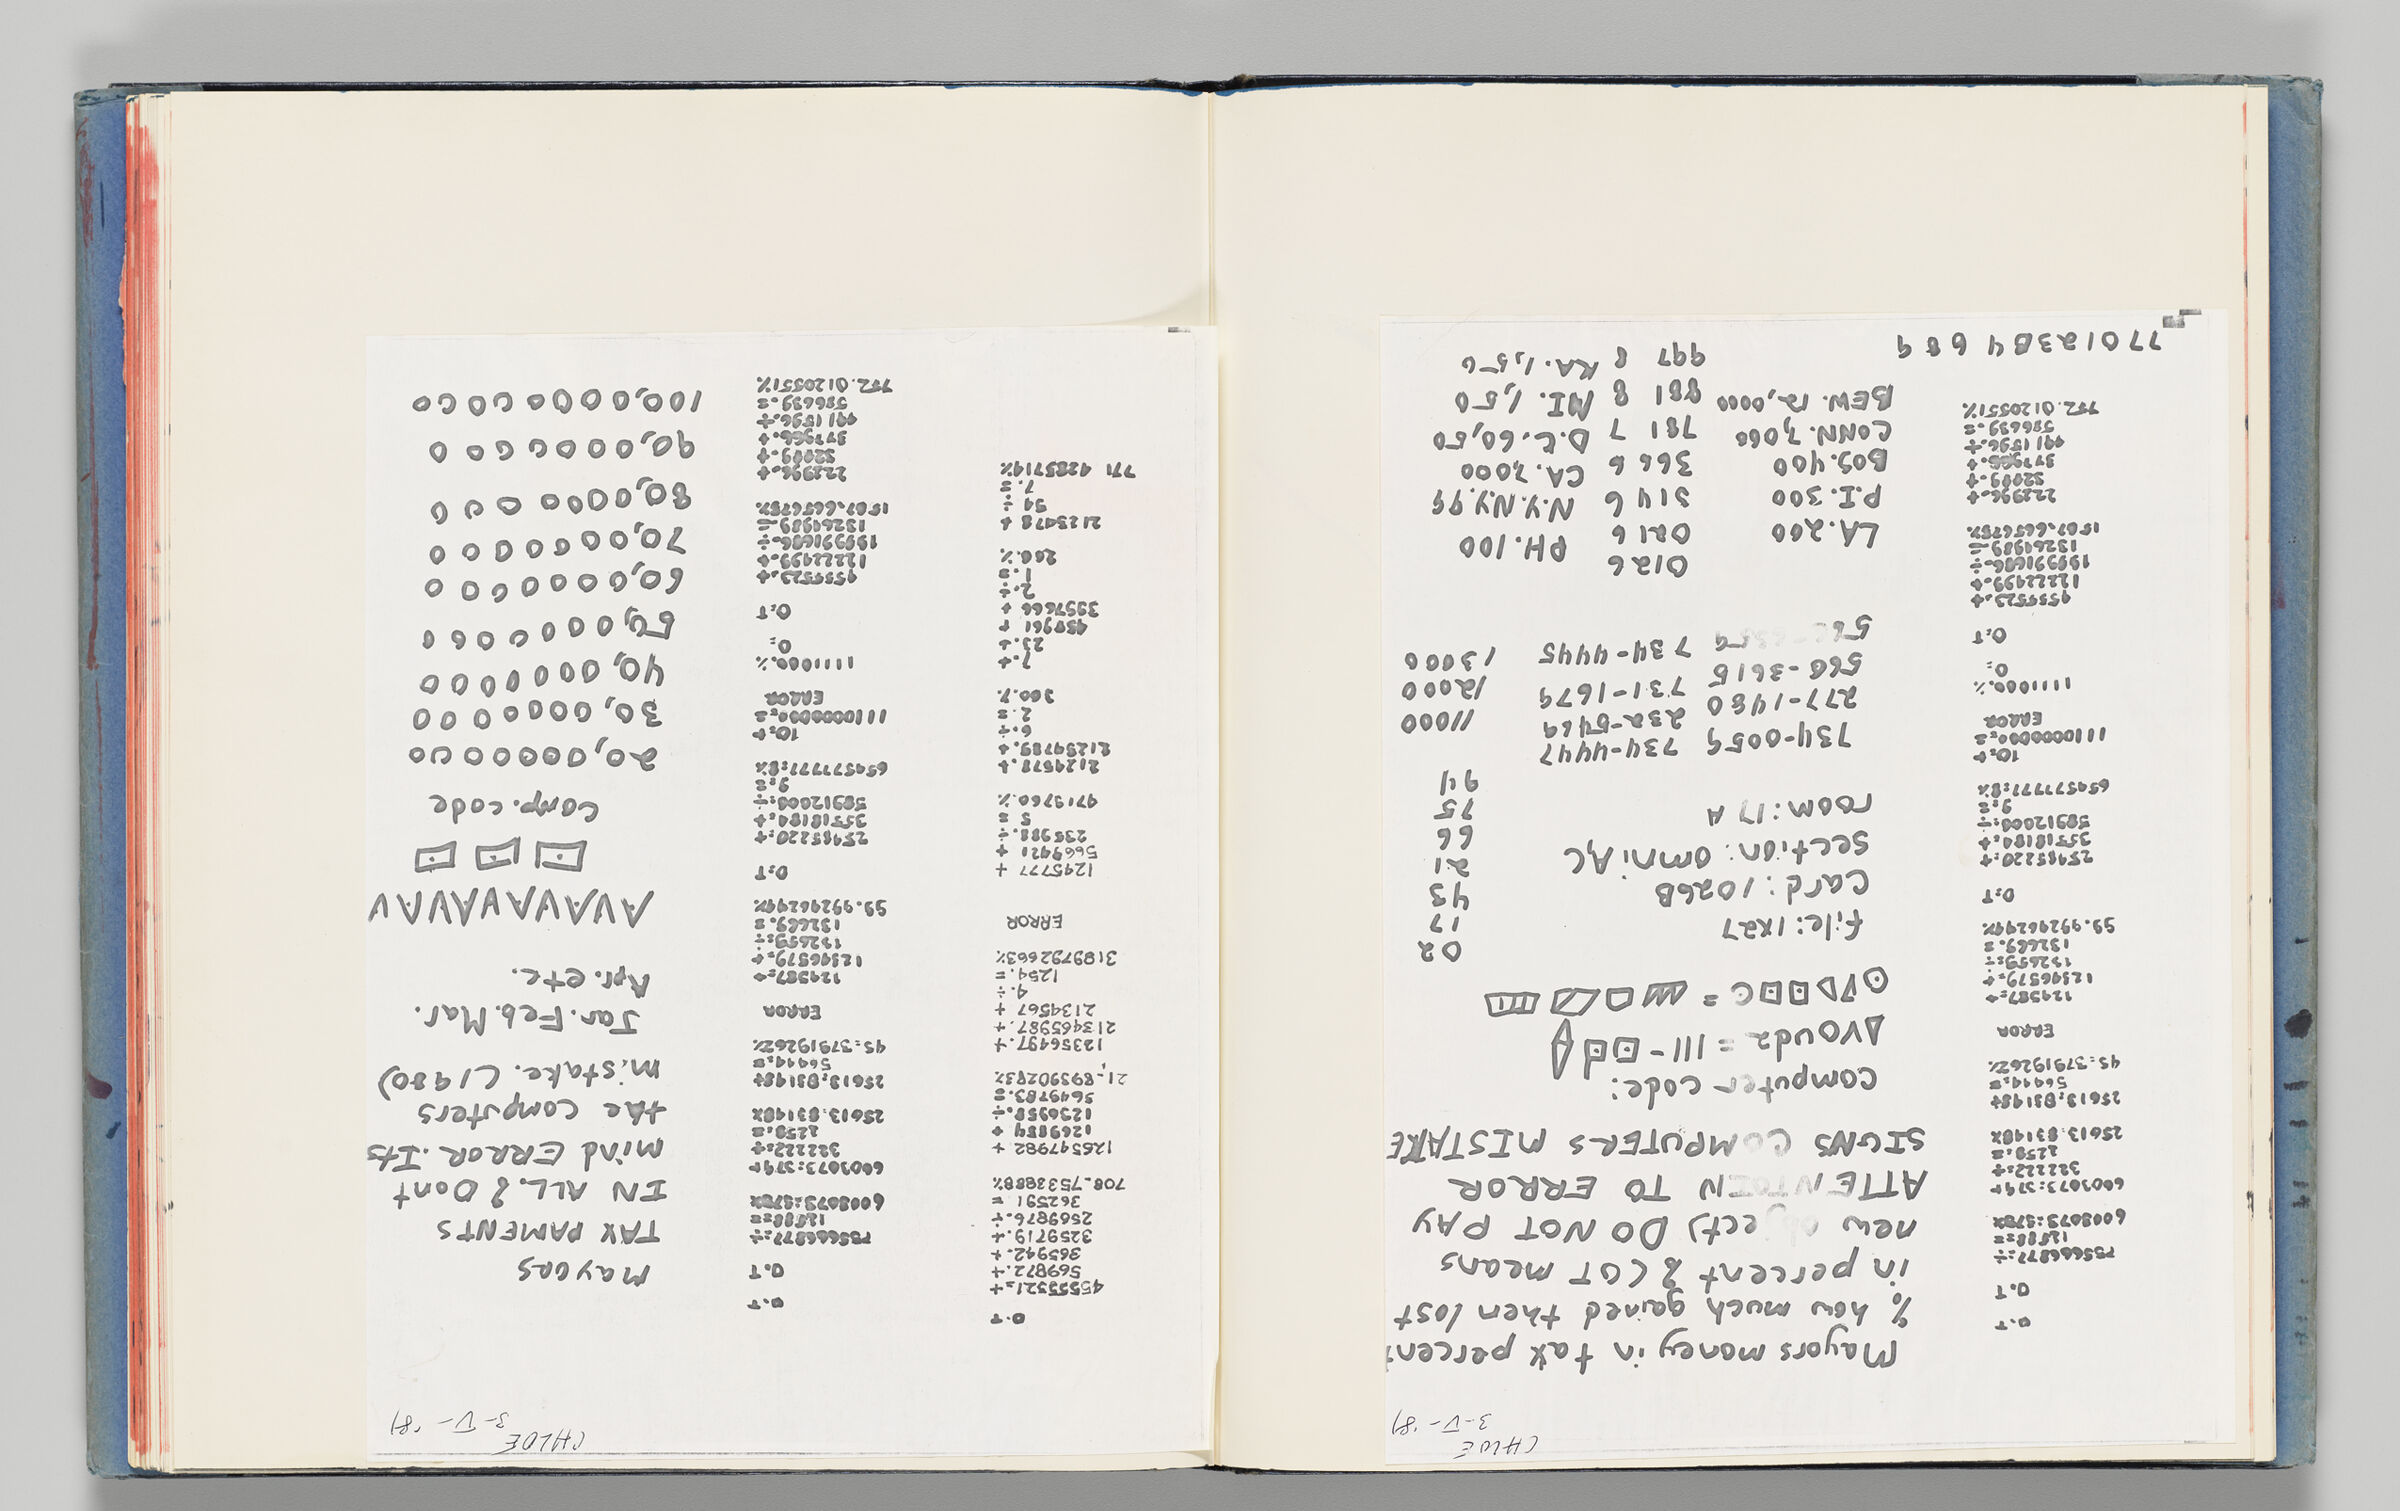 Untitled (Adhered Photocopy Of Notes, Left Page); Untitled (Adhered Photocopy Of Notes, Right Page)